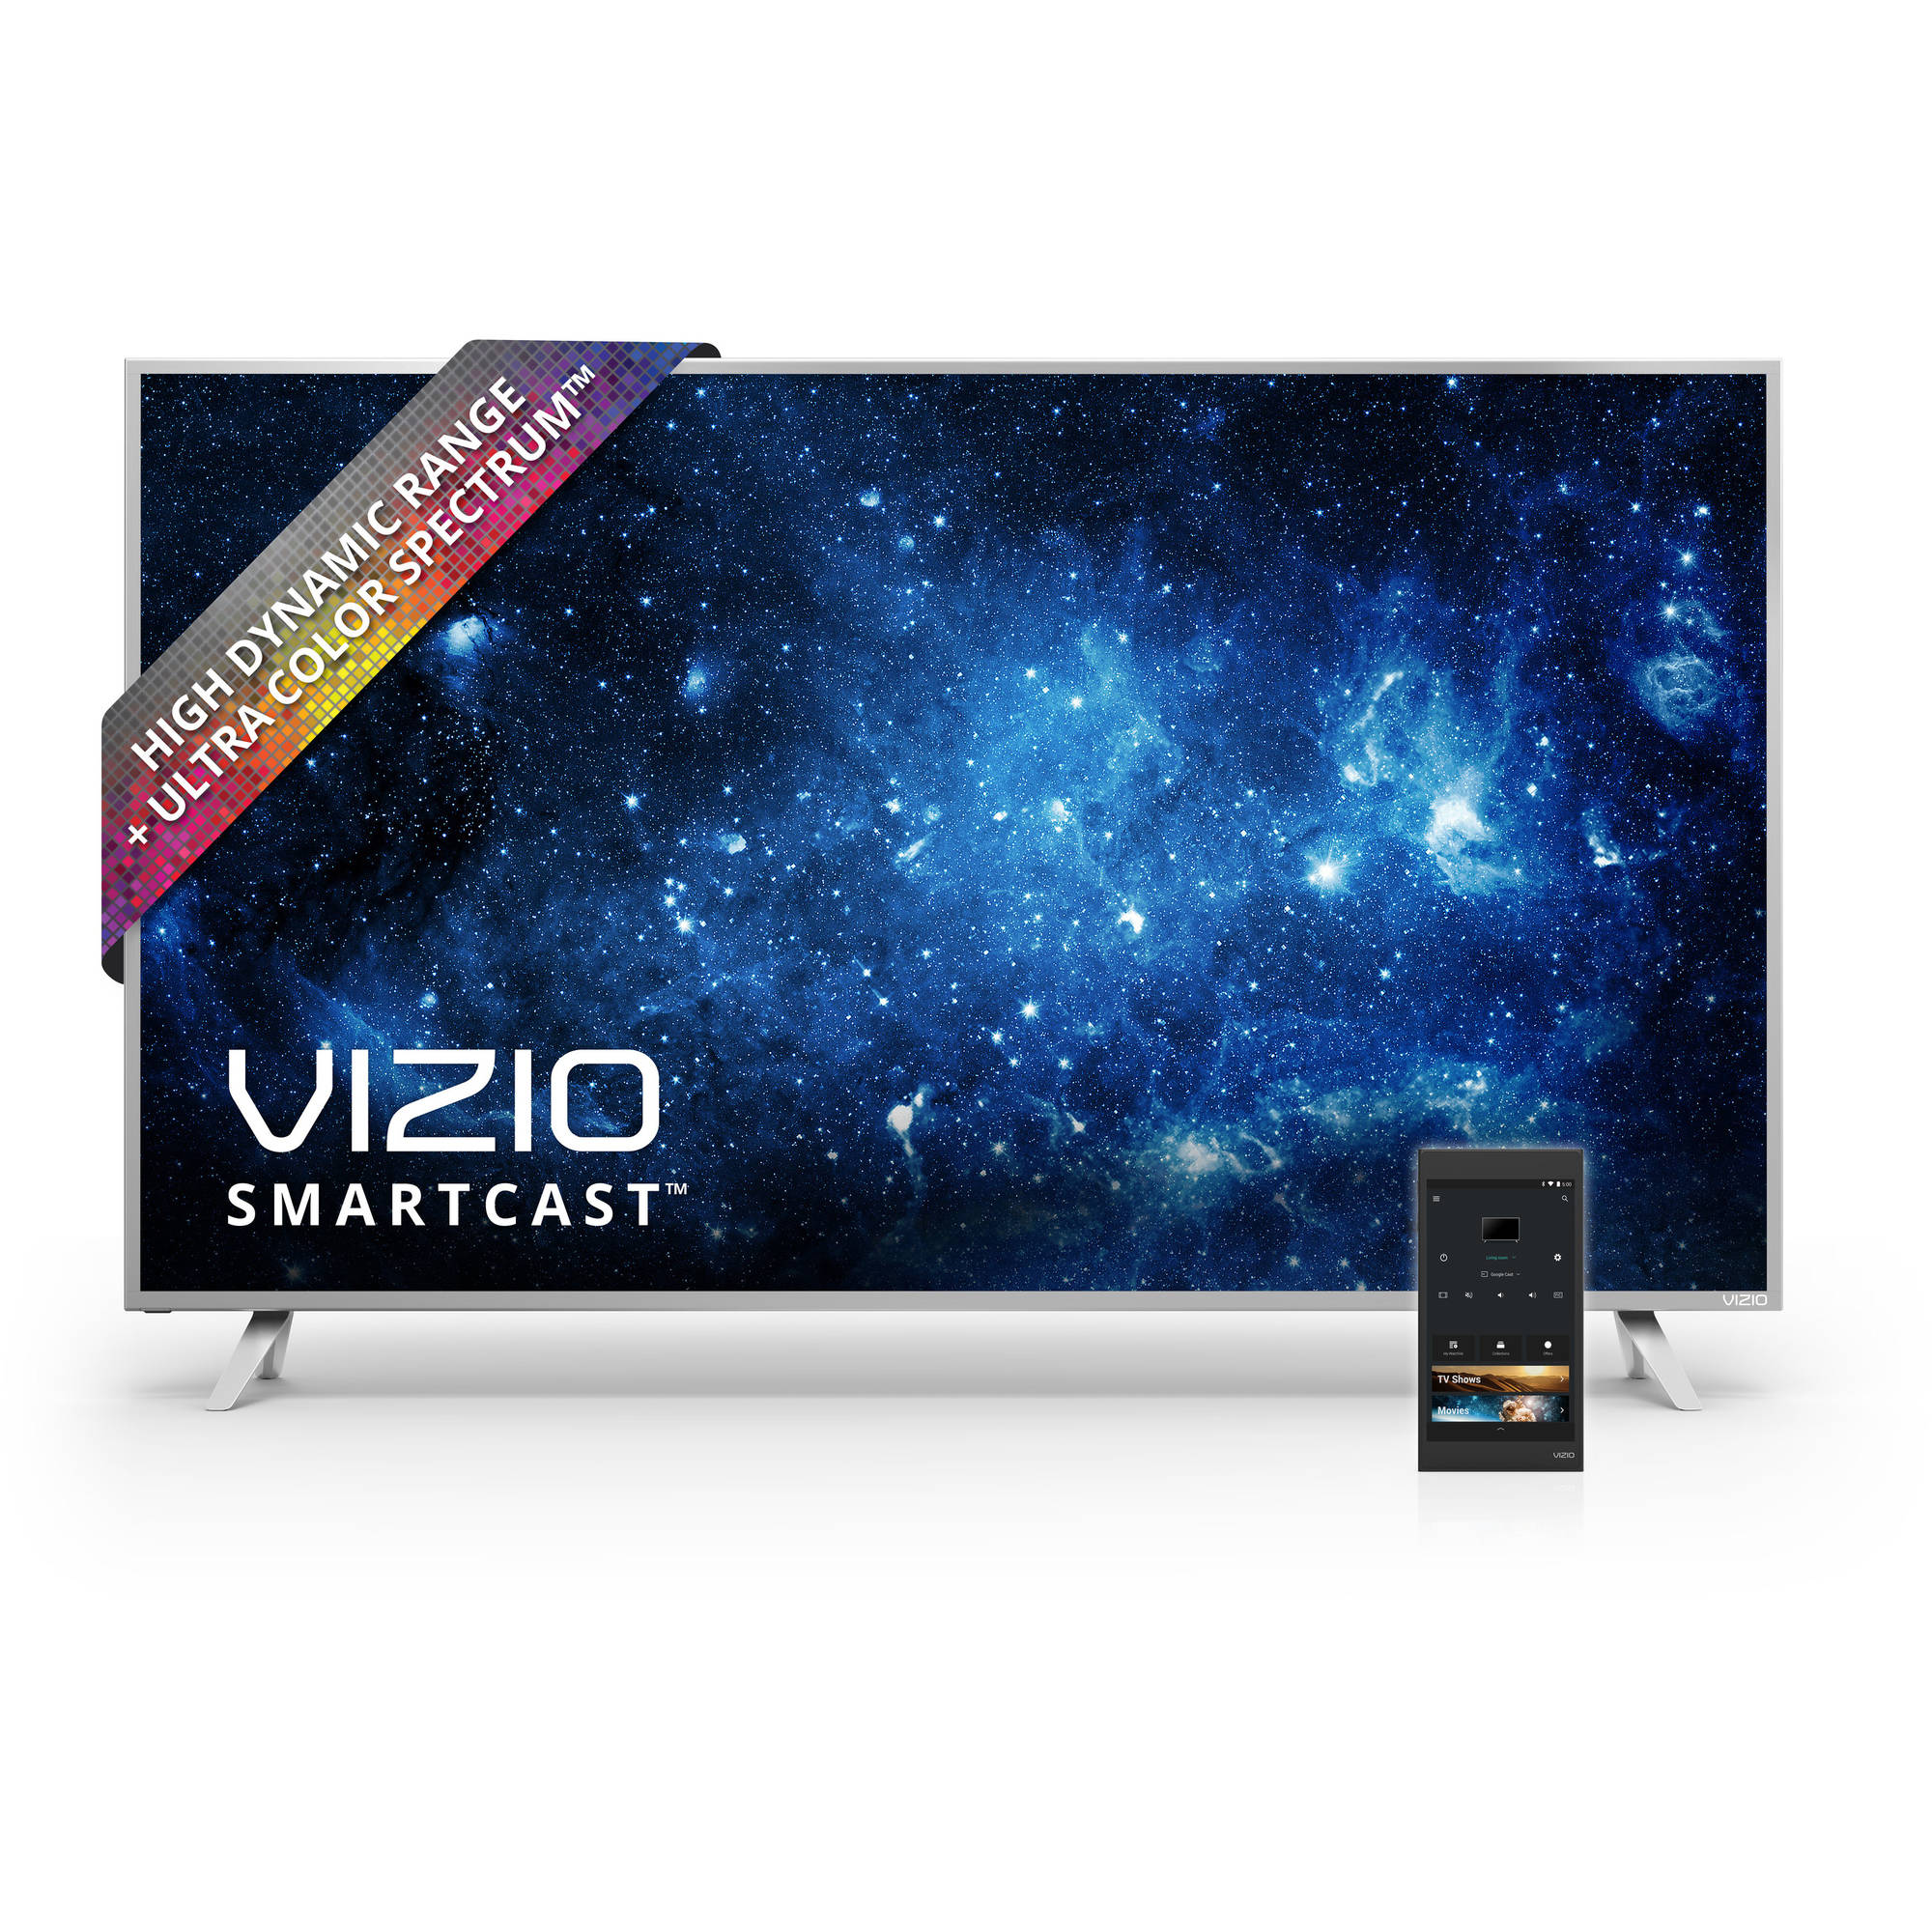 VIZIO SmartCast P-Series 75" Class (74.54" Diag.) 4K Ultra HD HDR 2160p 240Hz Full Array LED Smart Home Theater Display w/ Chromecast built-in (P75-C1) - image 1 of 17